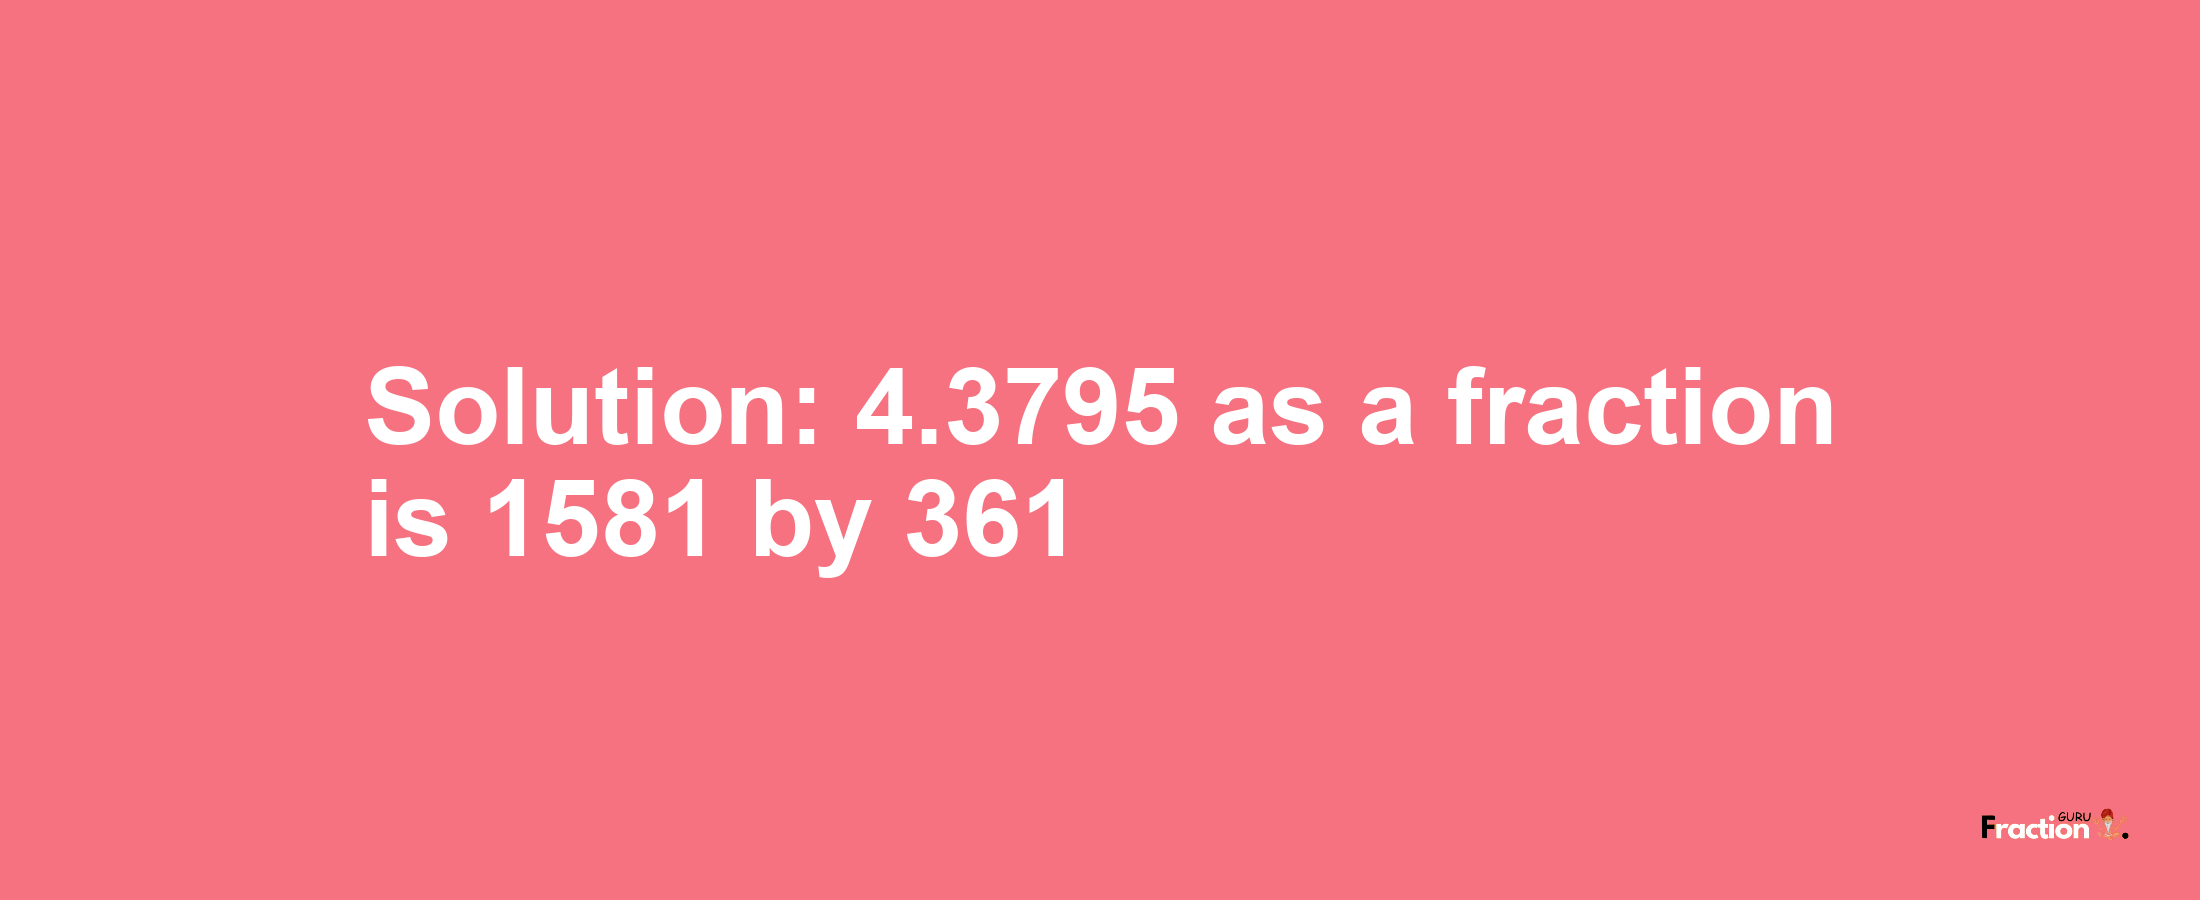 Solution:4.3795 as a fraction is 1581/361